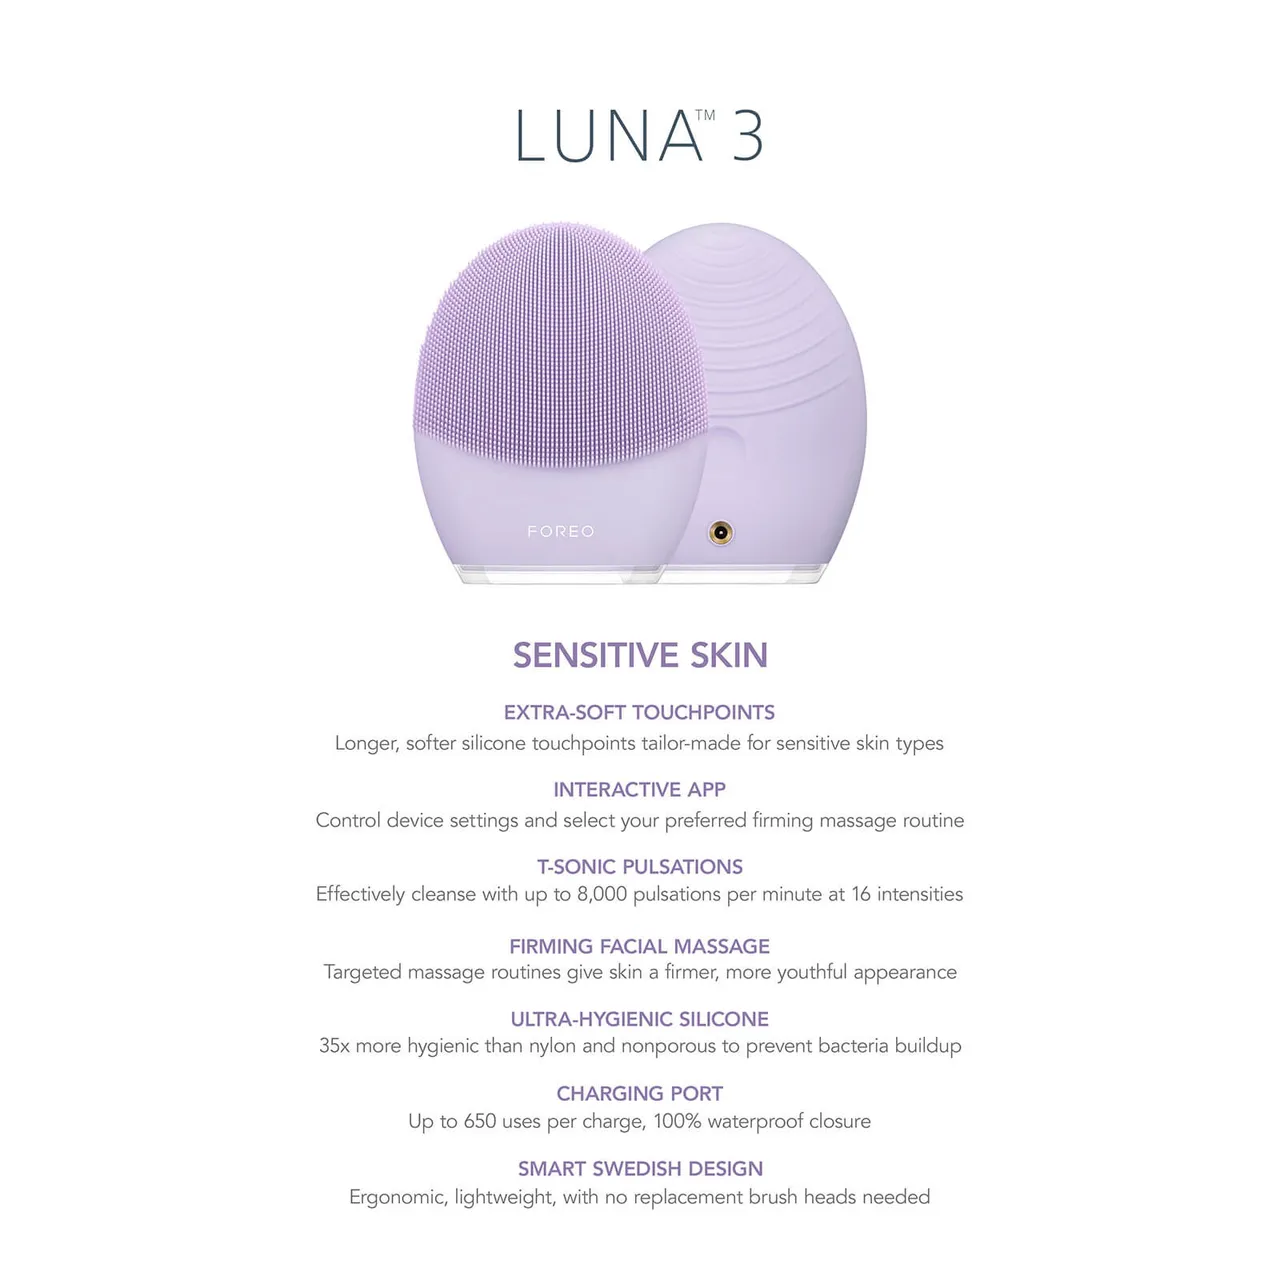 FOREO LUNA 3 Face Brush and Anti-Aging Massager (Various Options) - For Sensitive Skin